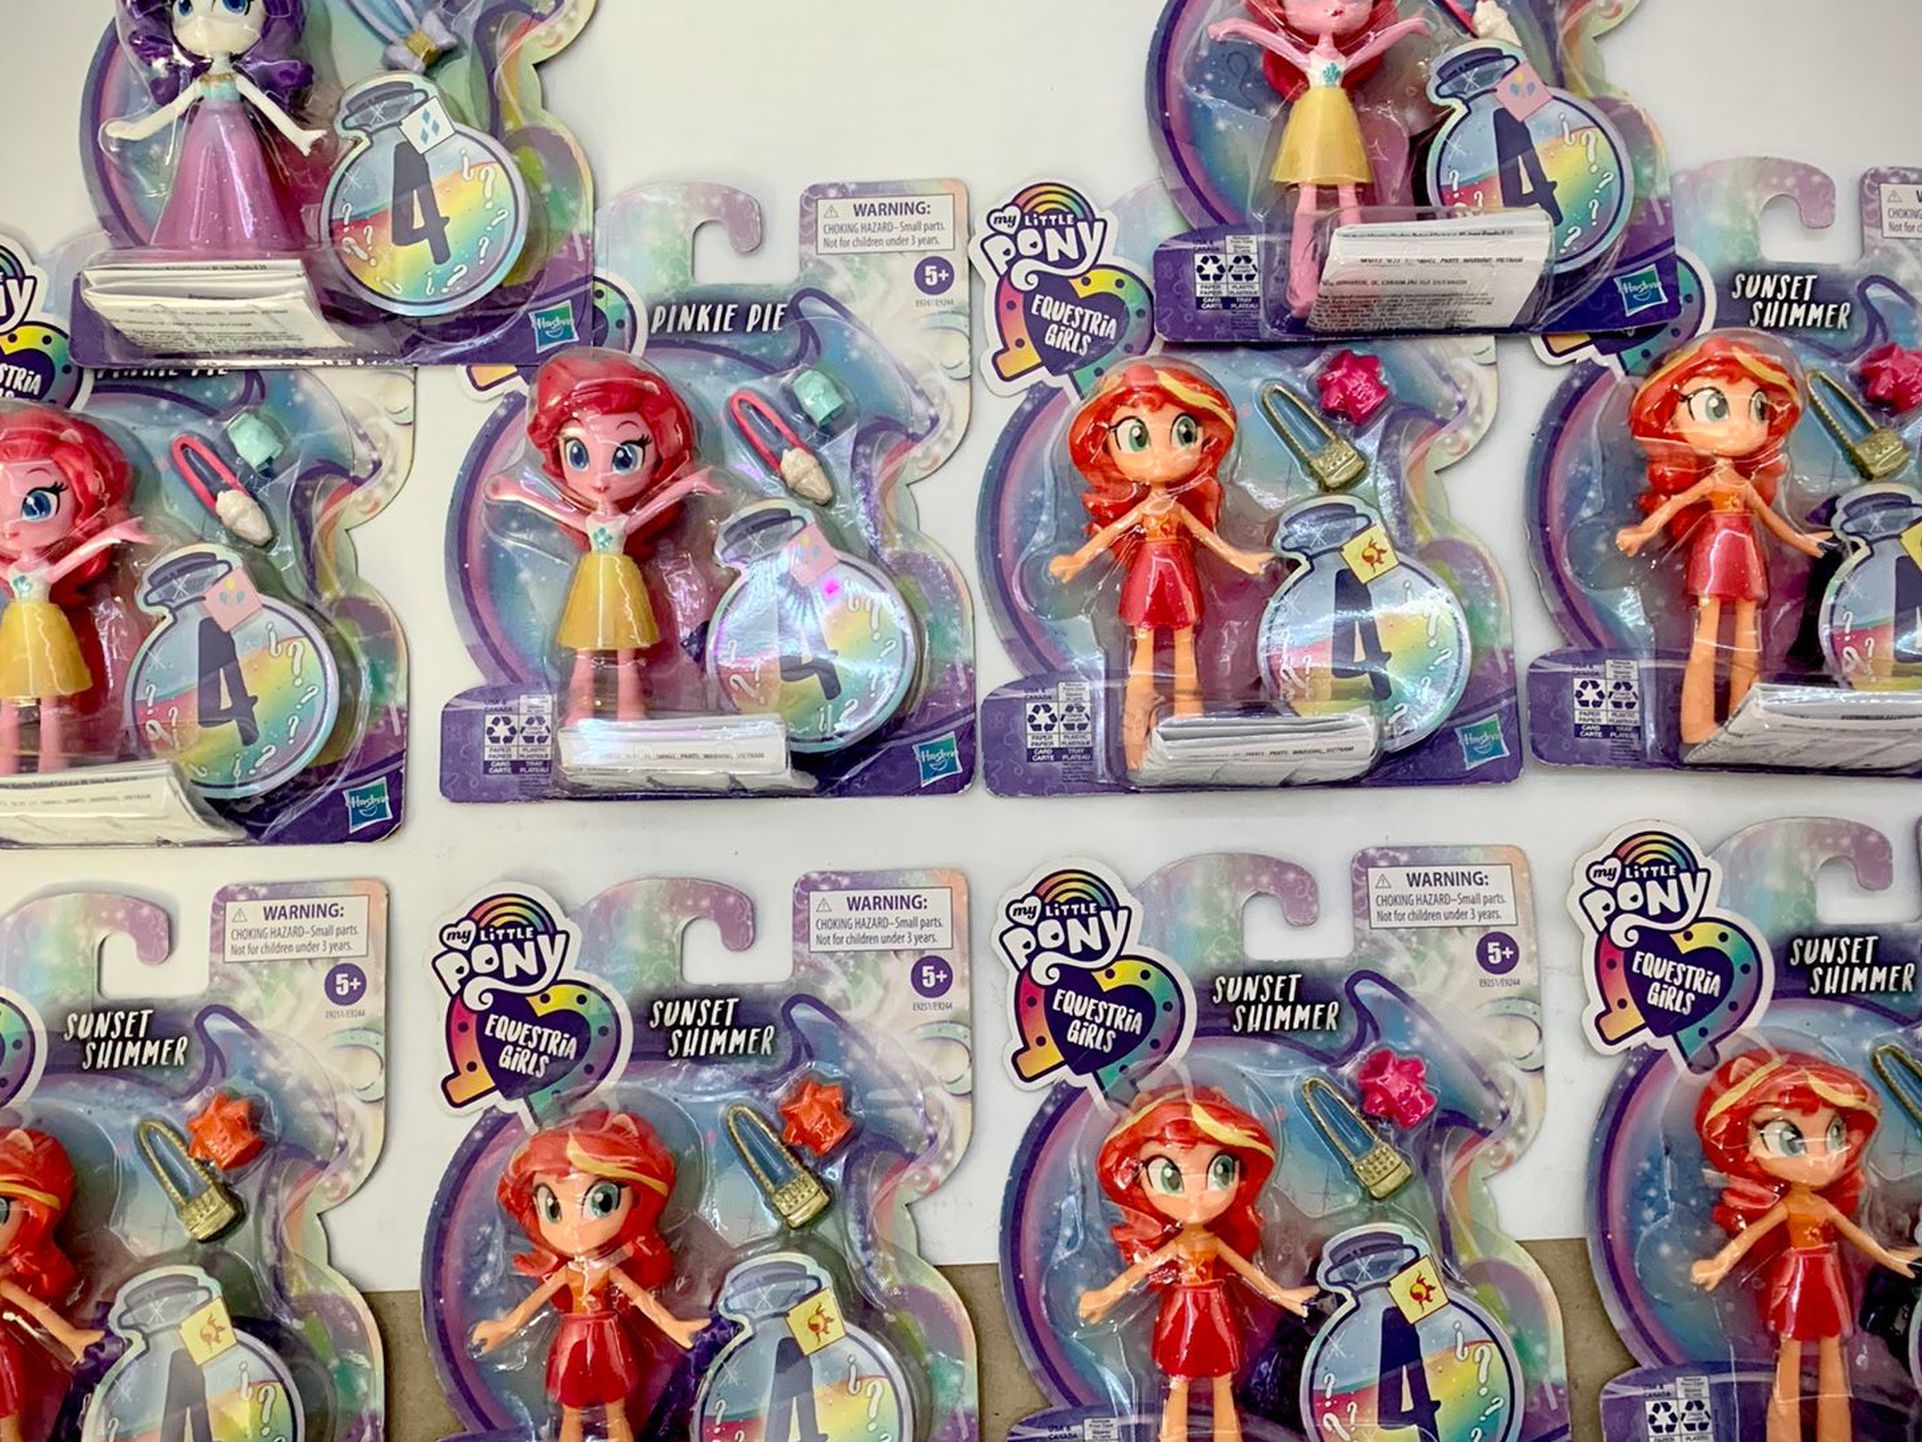 My Little Pony Equestria Girls Fashion Squad Rarity, Pinky Pie and Sunset Shimmer Doll Accessories